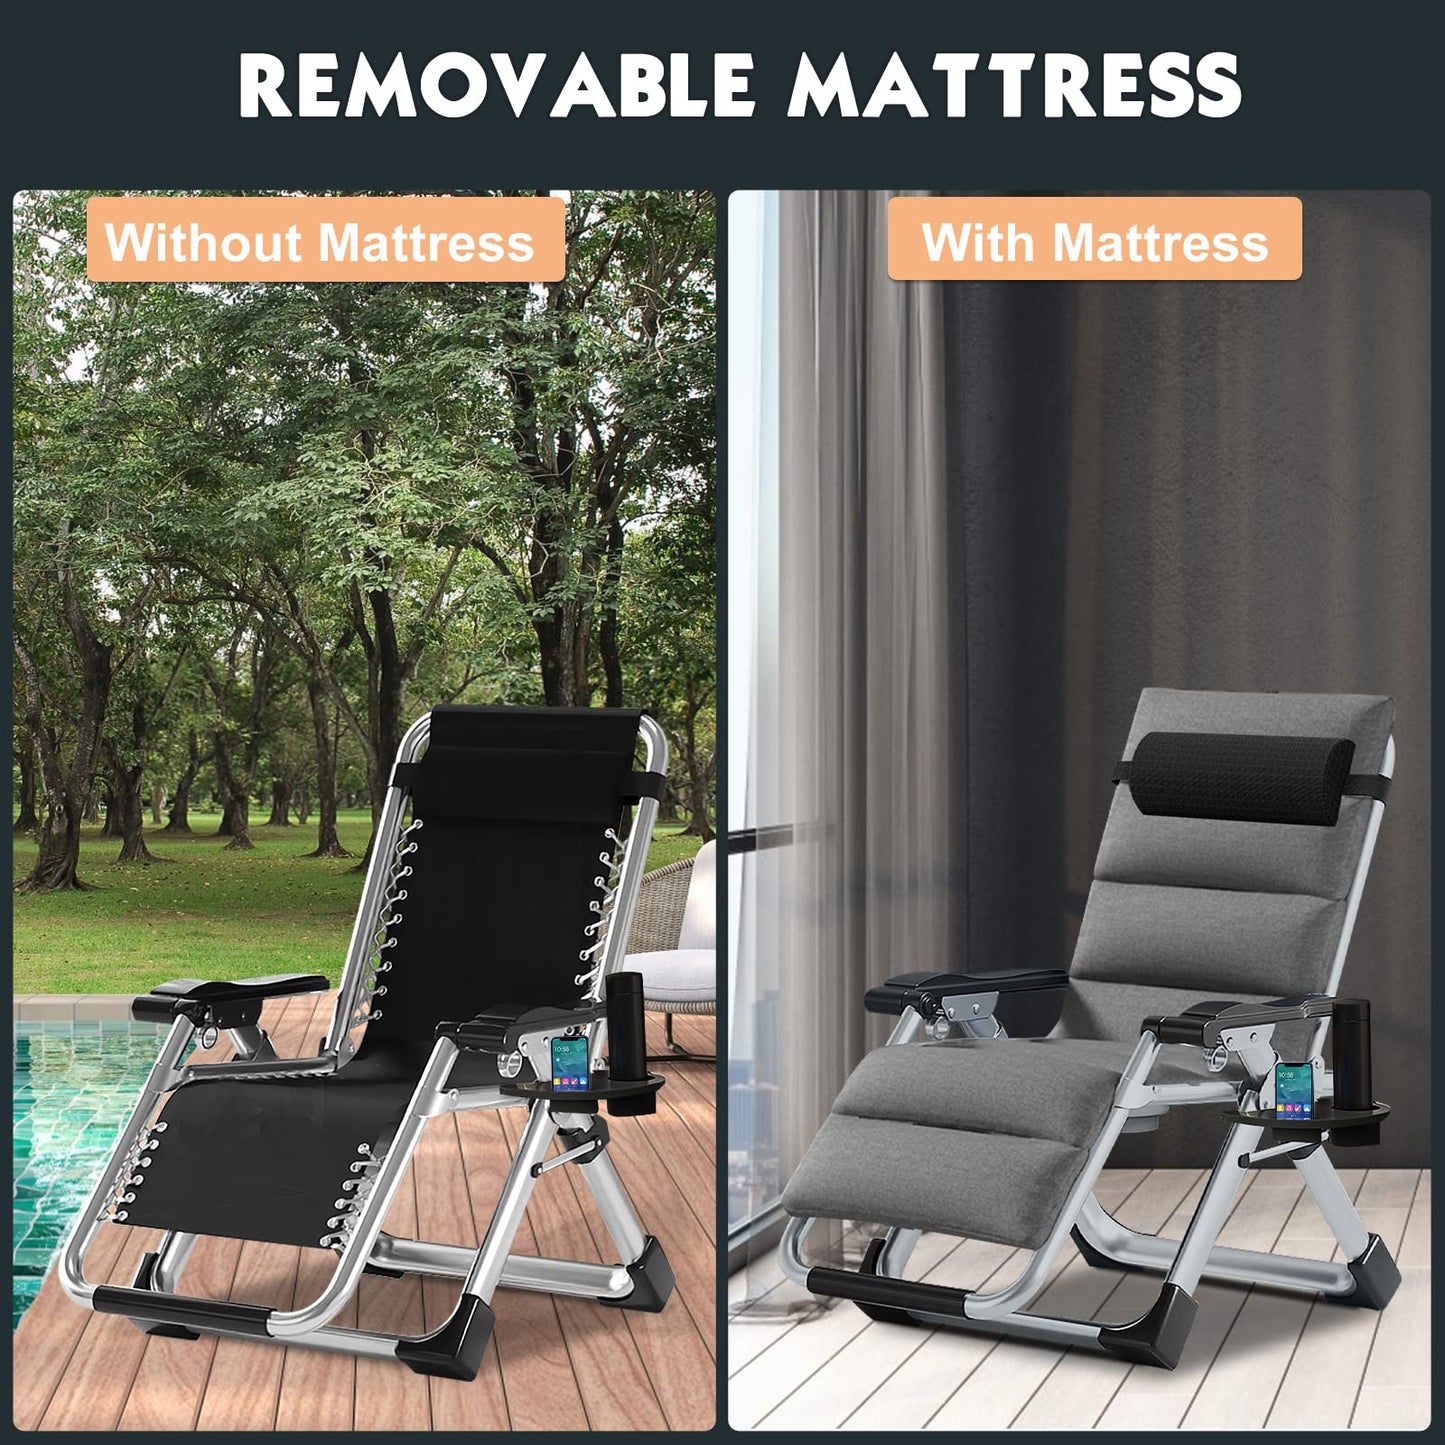 MOPHOTO Zero Gravity Chair, Outdoor Padded Lounge Chair with Side Table, Zero Gravity Recliner Chair, Outdoor Reclining Chair, Sturdy & Comfortable, Supports up to 440lbs Line Gray Zero Gravity Chair-2PK